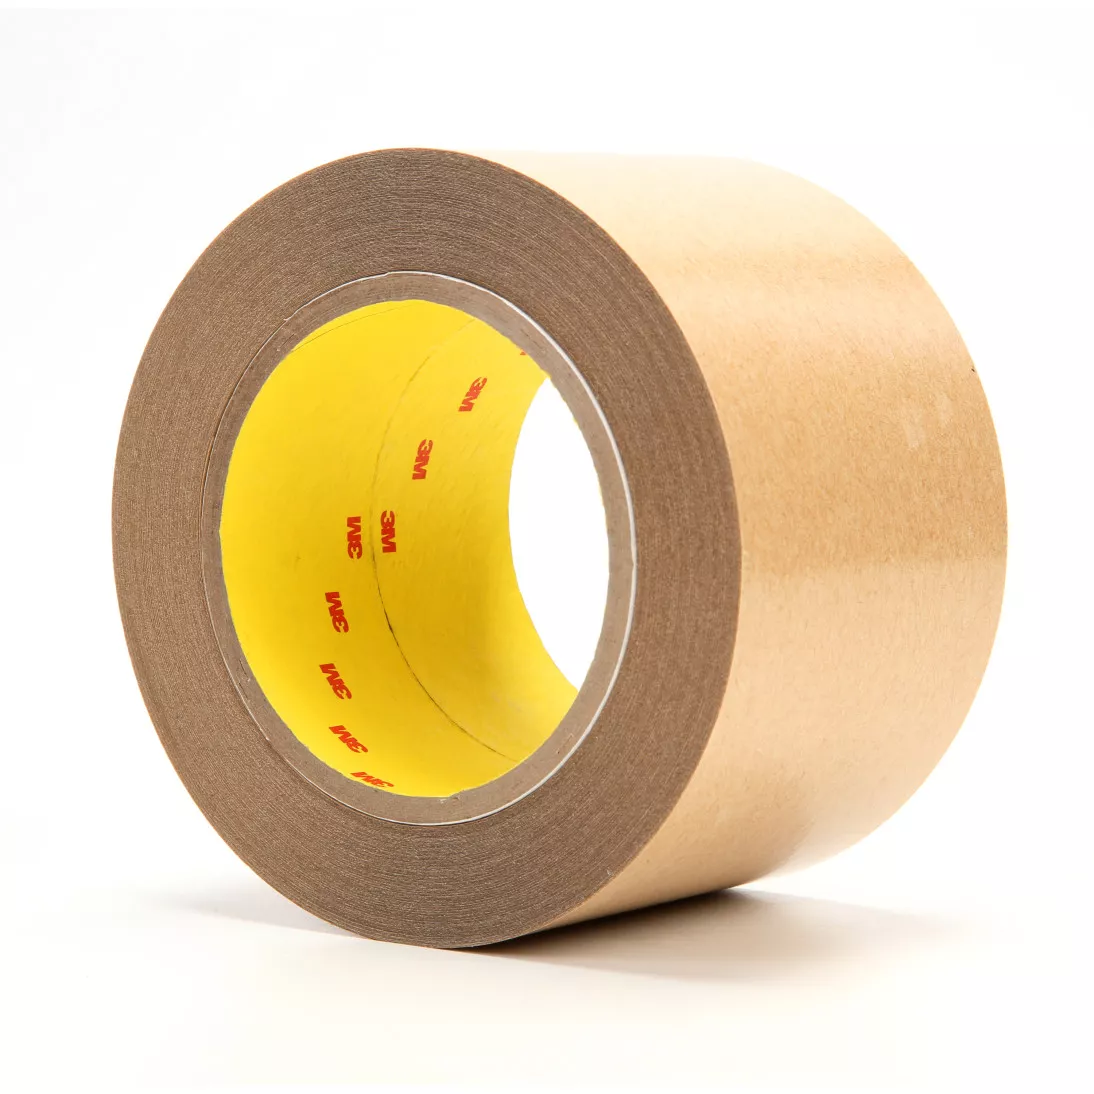 3M™ Double Coated Tape 415, Clear, 3 in x 36 yd, 4 mil, 12 rolls per
case